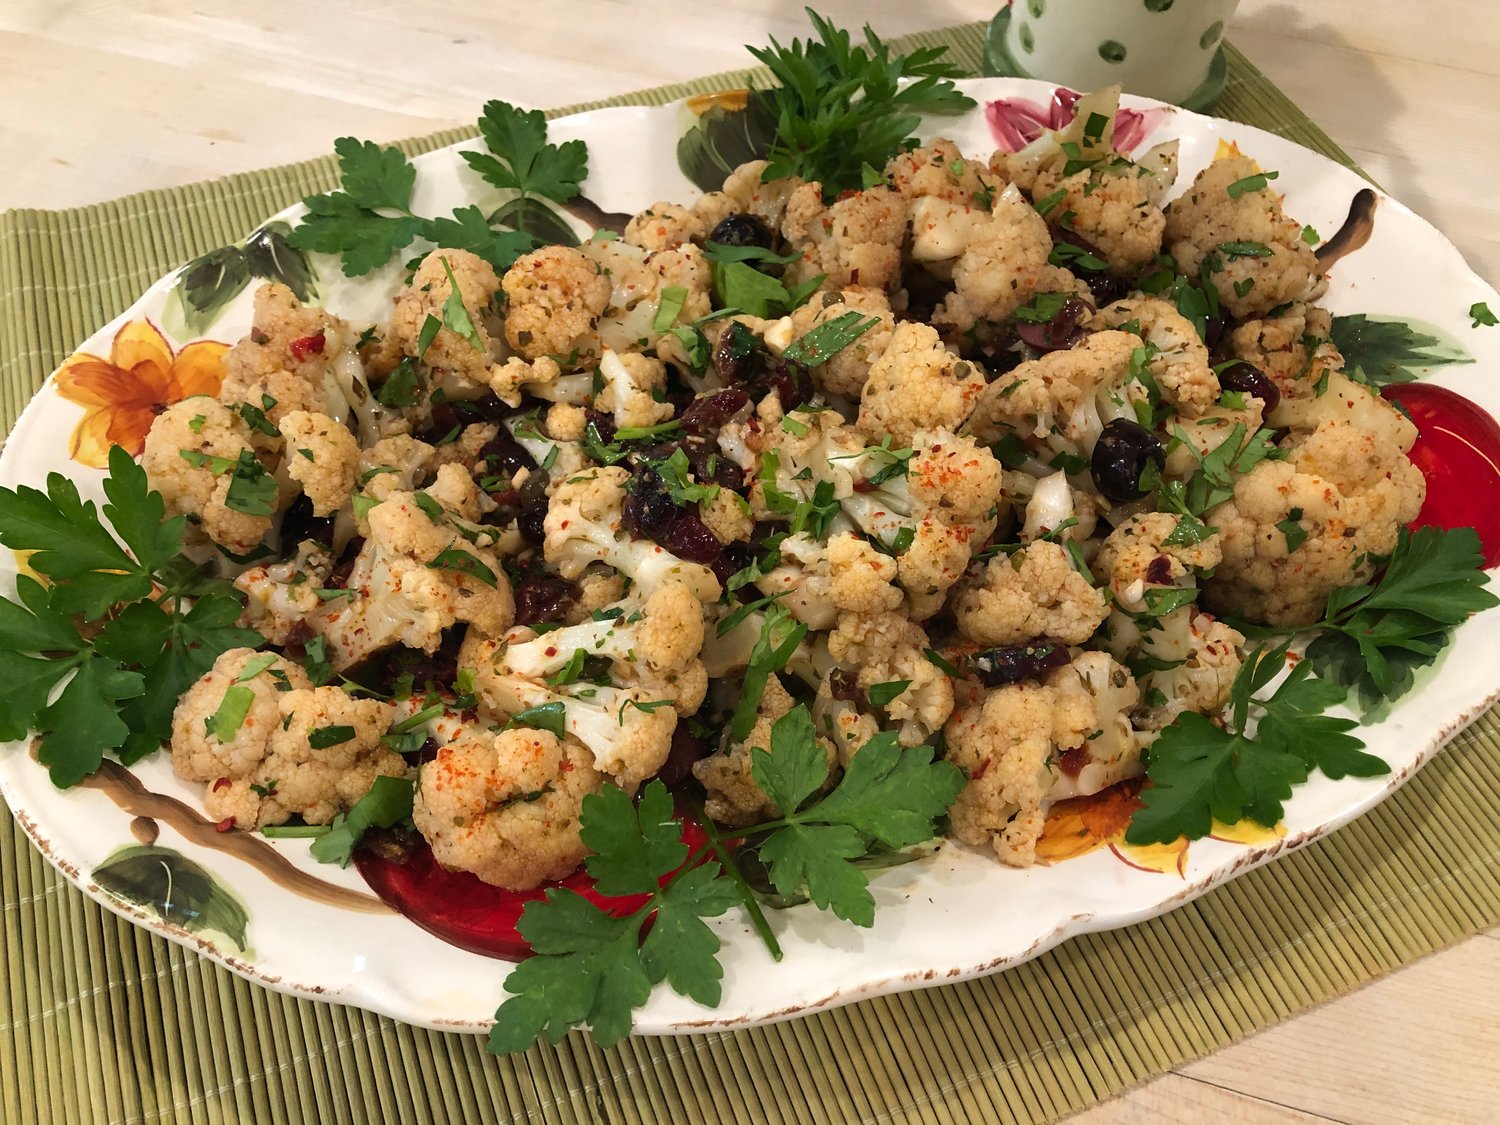 Fruity, spicy and salty Calabrian chiles make this cauliflower salad with capers and olives a summer favorite.